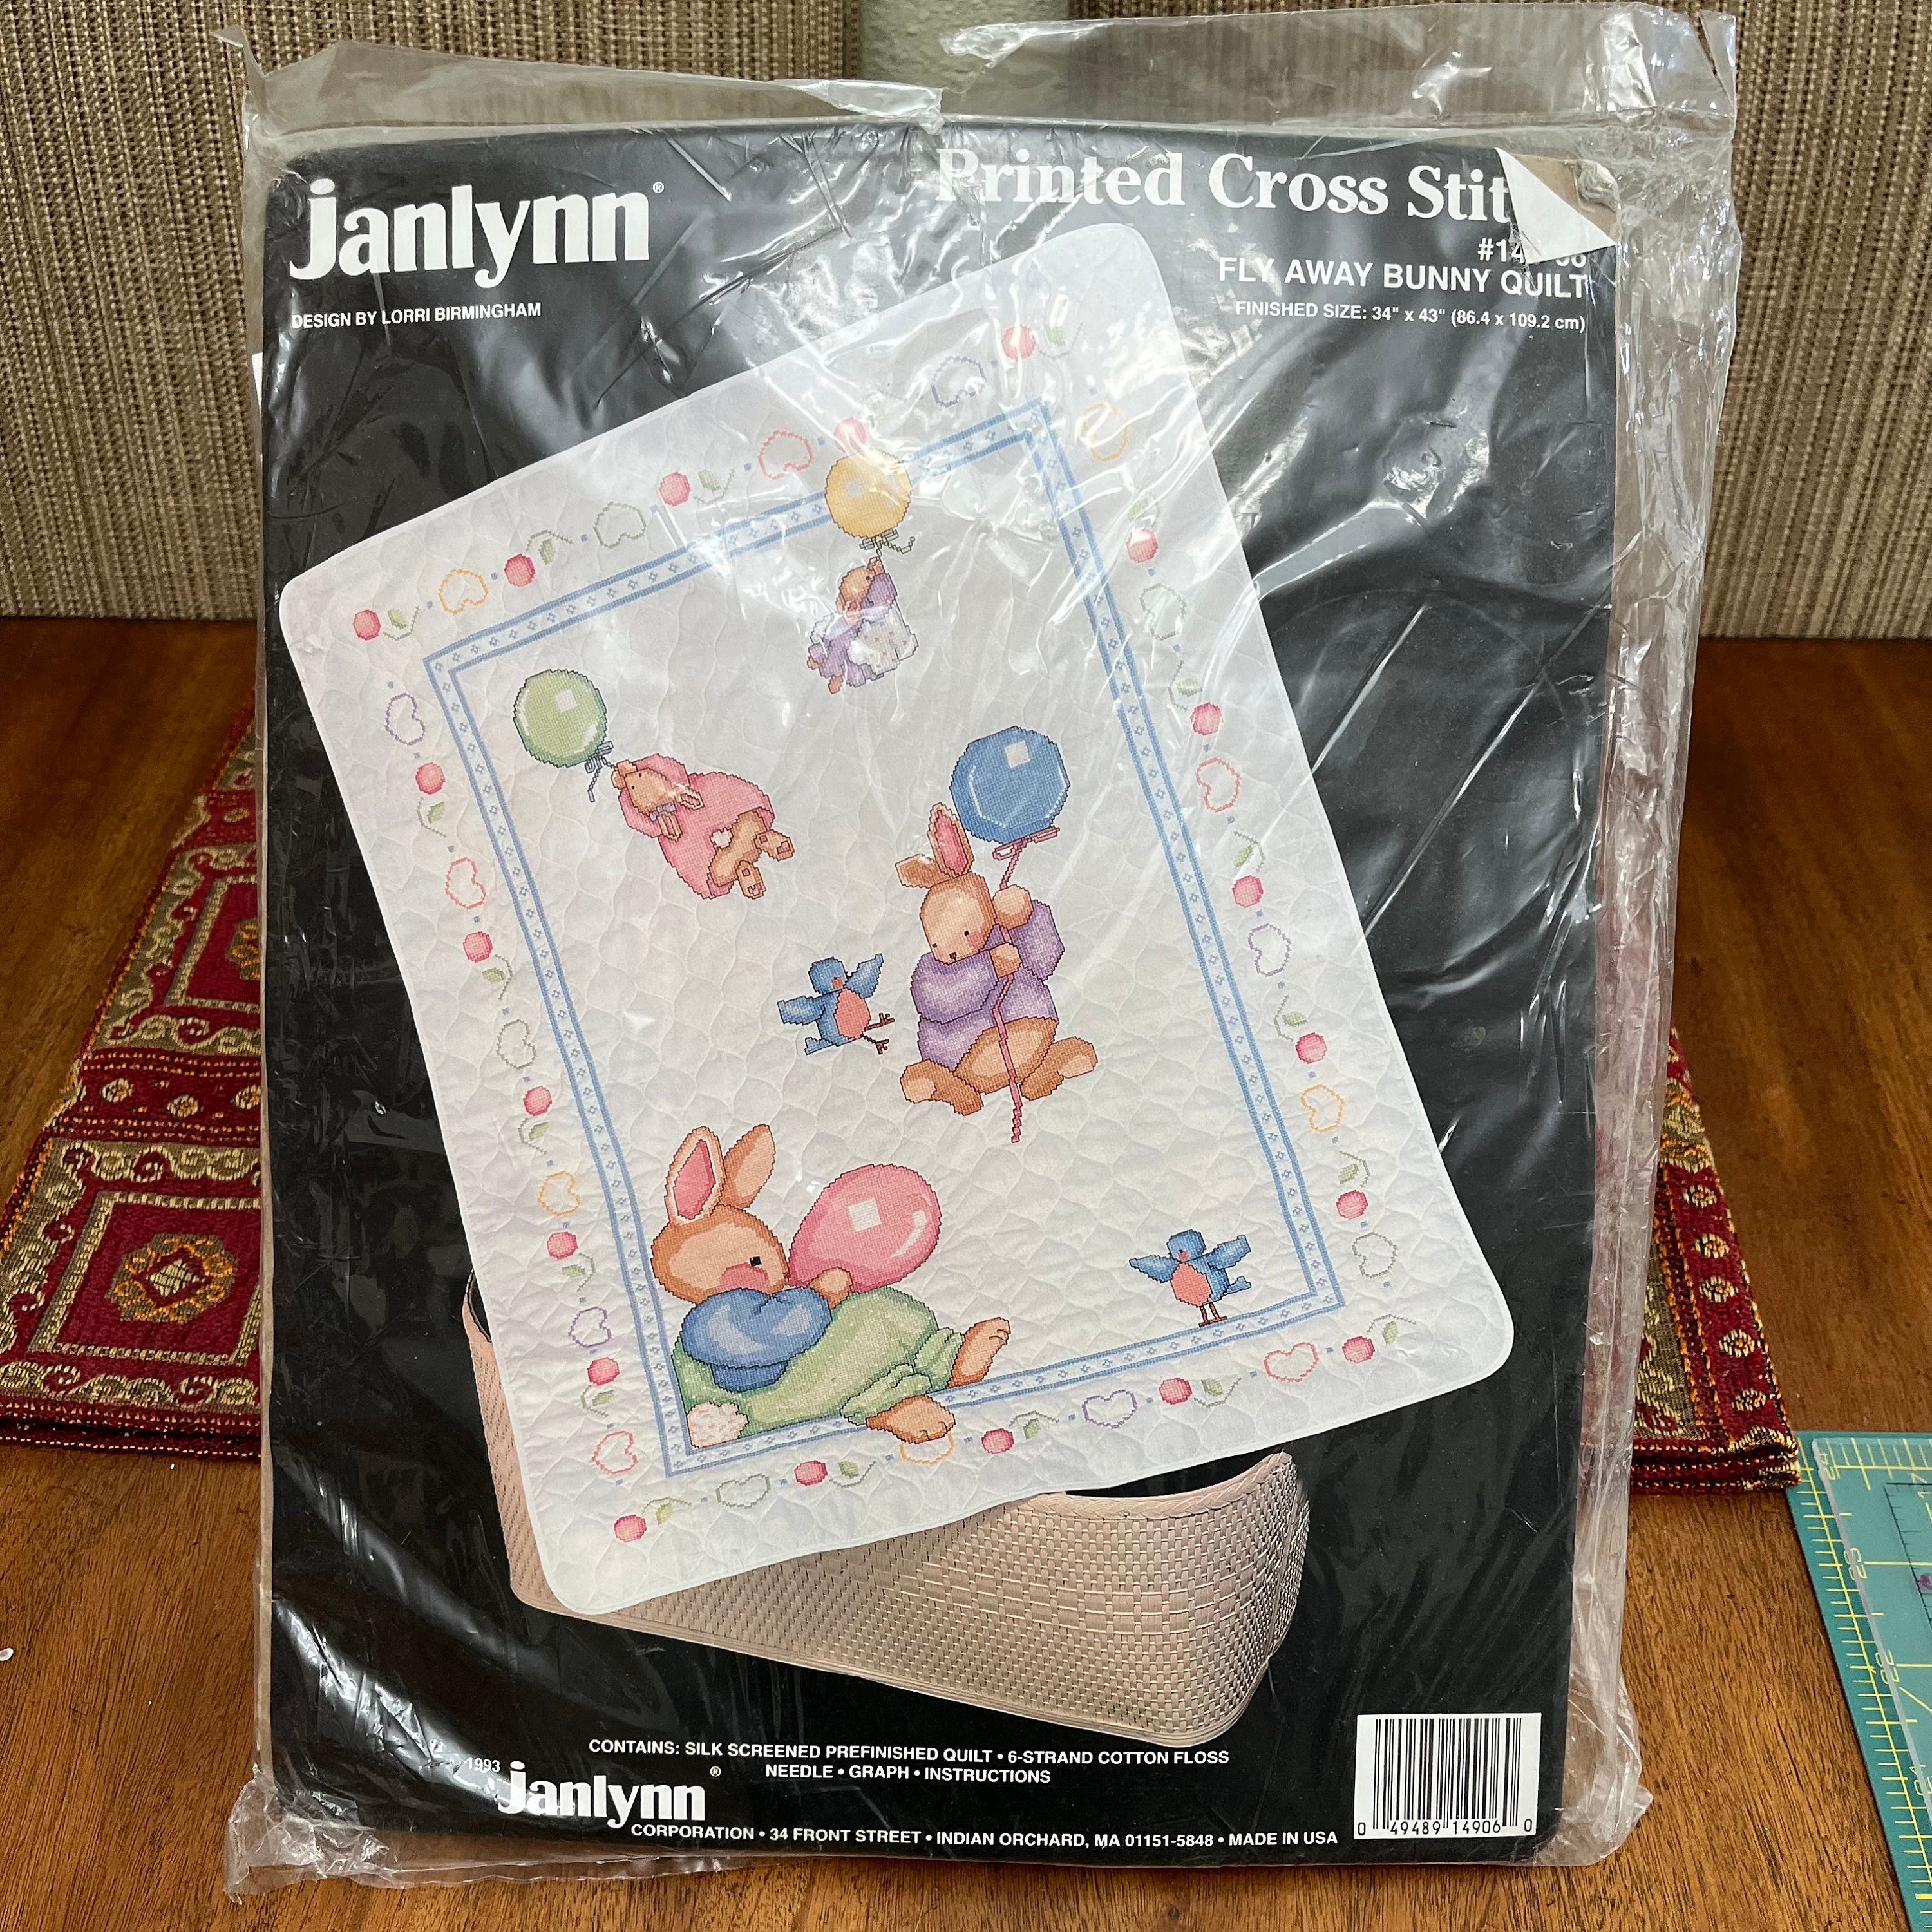 VINTAGE Janlynn Fly Away Bunny Crib Cover Baby Quilt Stamped Cross Stitch  Kit 